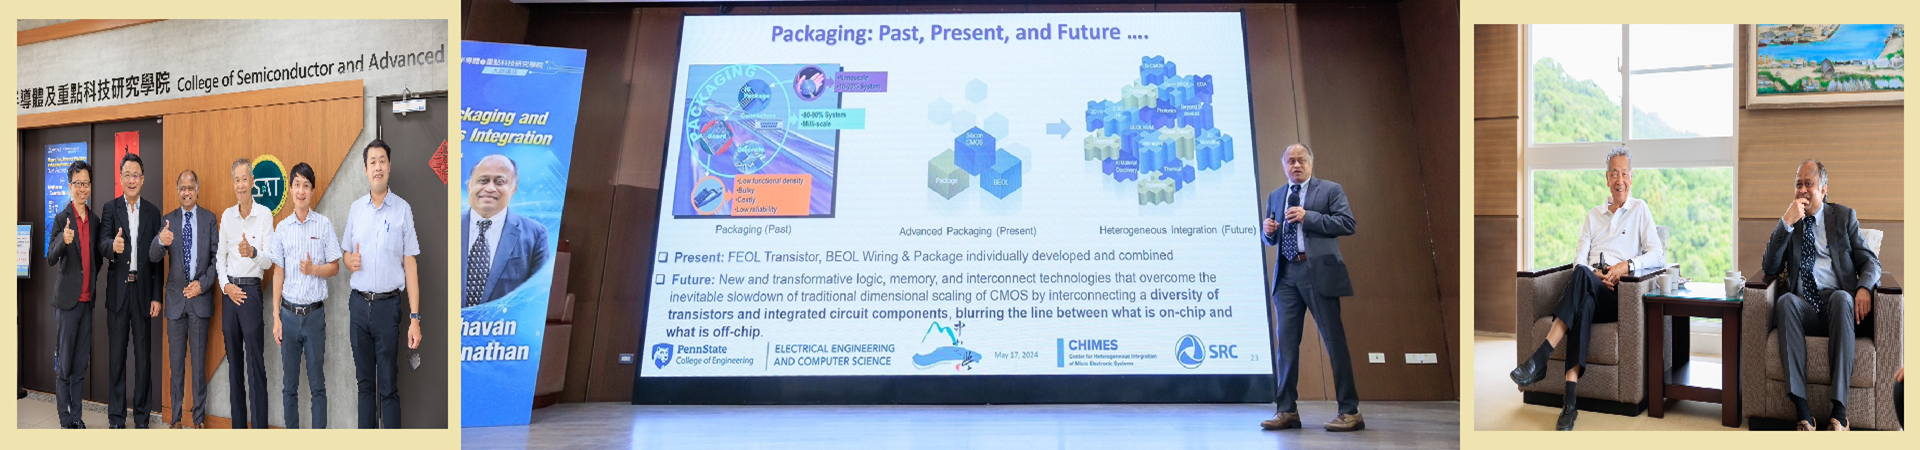 Master Seminar "Moore’s Law, Advanced Packaging and Heterogeneous Integration /Past, Present & Future"  by Prof.Swami